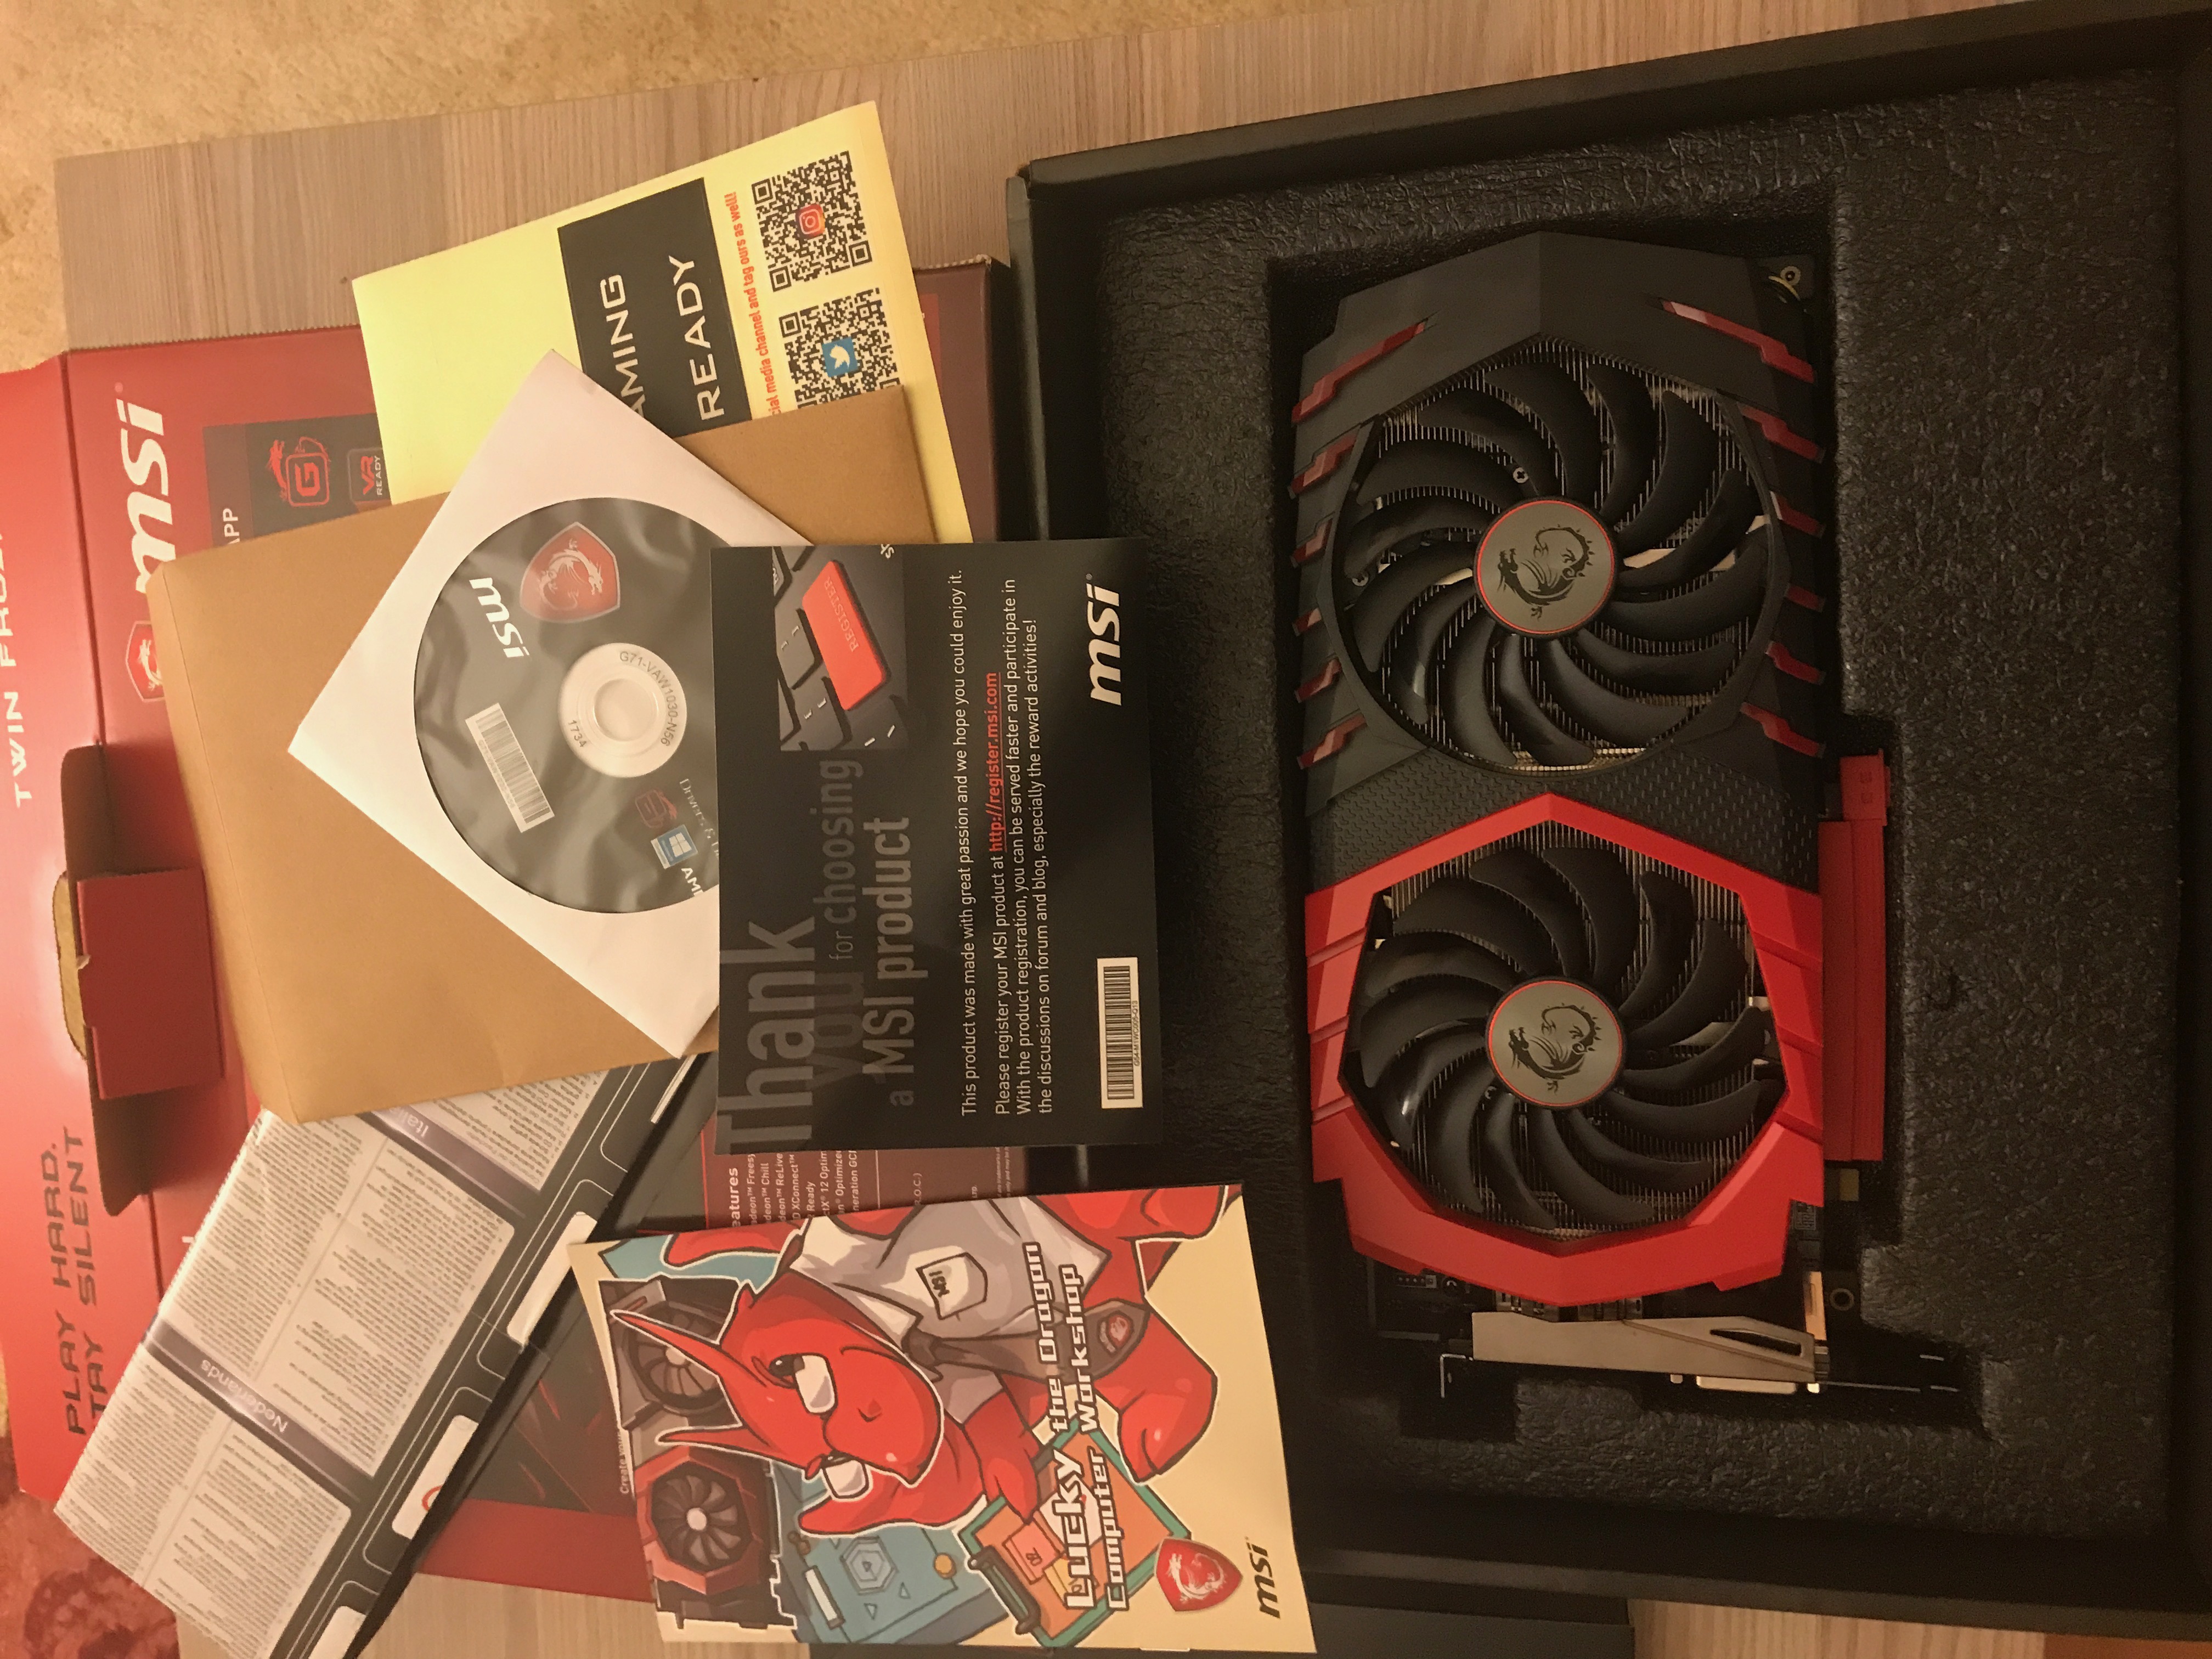 Rx580 Gaming x в руке. Msi rx 580 gaming x